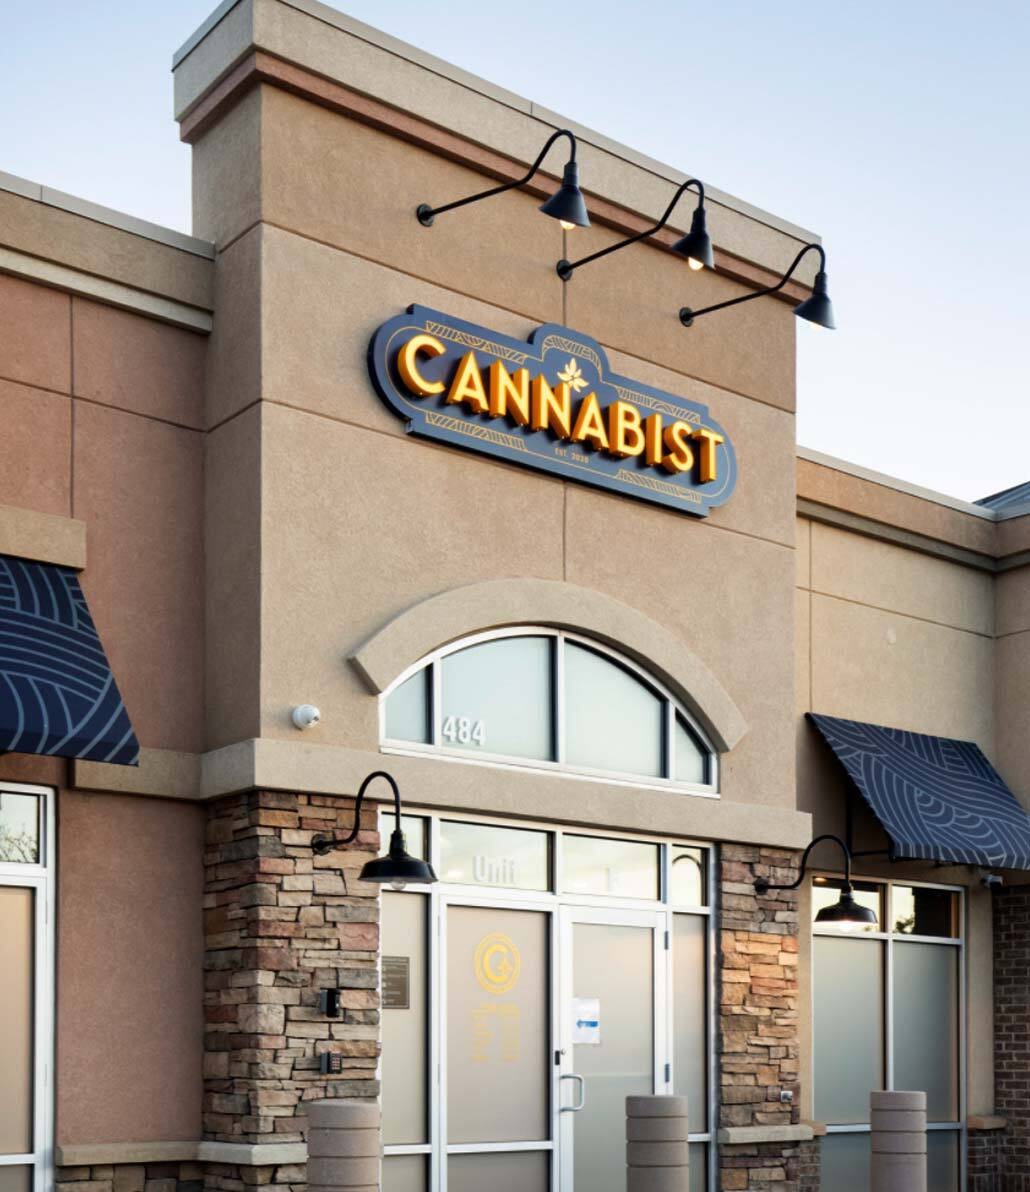 Cannabist - A Higher Experience - We hold ourselves, and the brands that we  carry, to a higher standard - elevating recreational cannabis into a higher  experience - Welcome to Cannabist